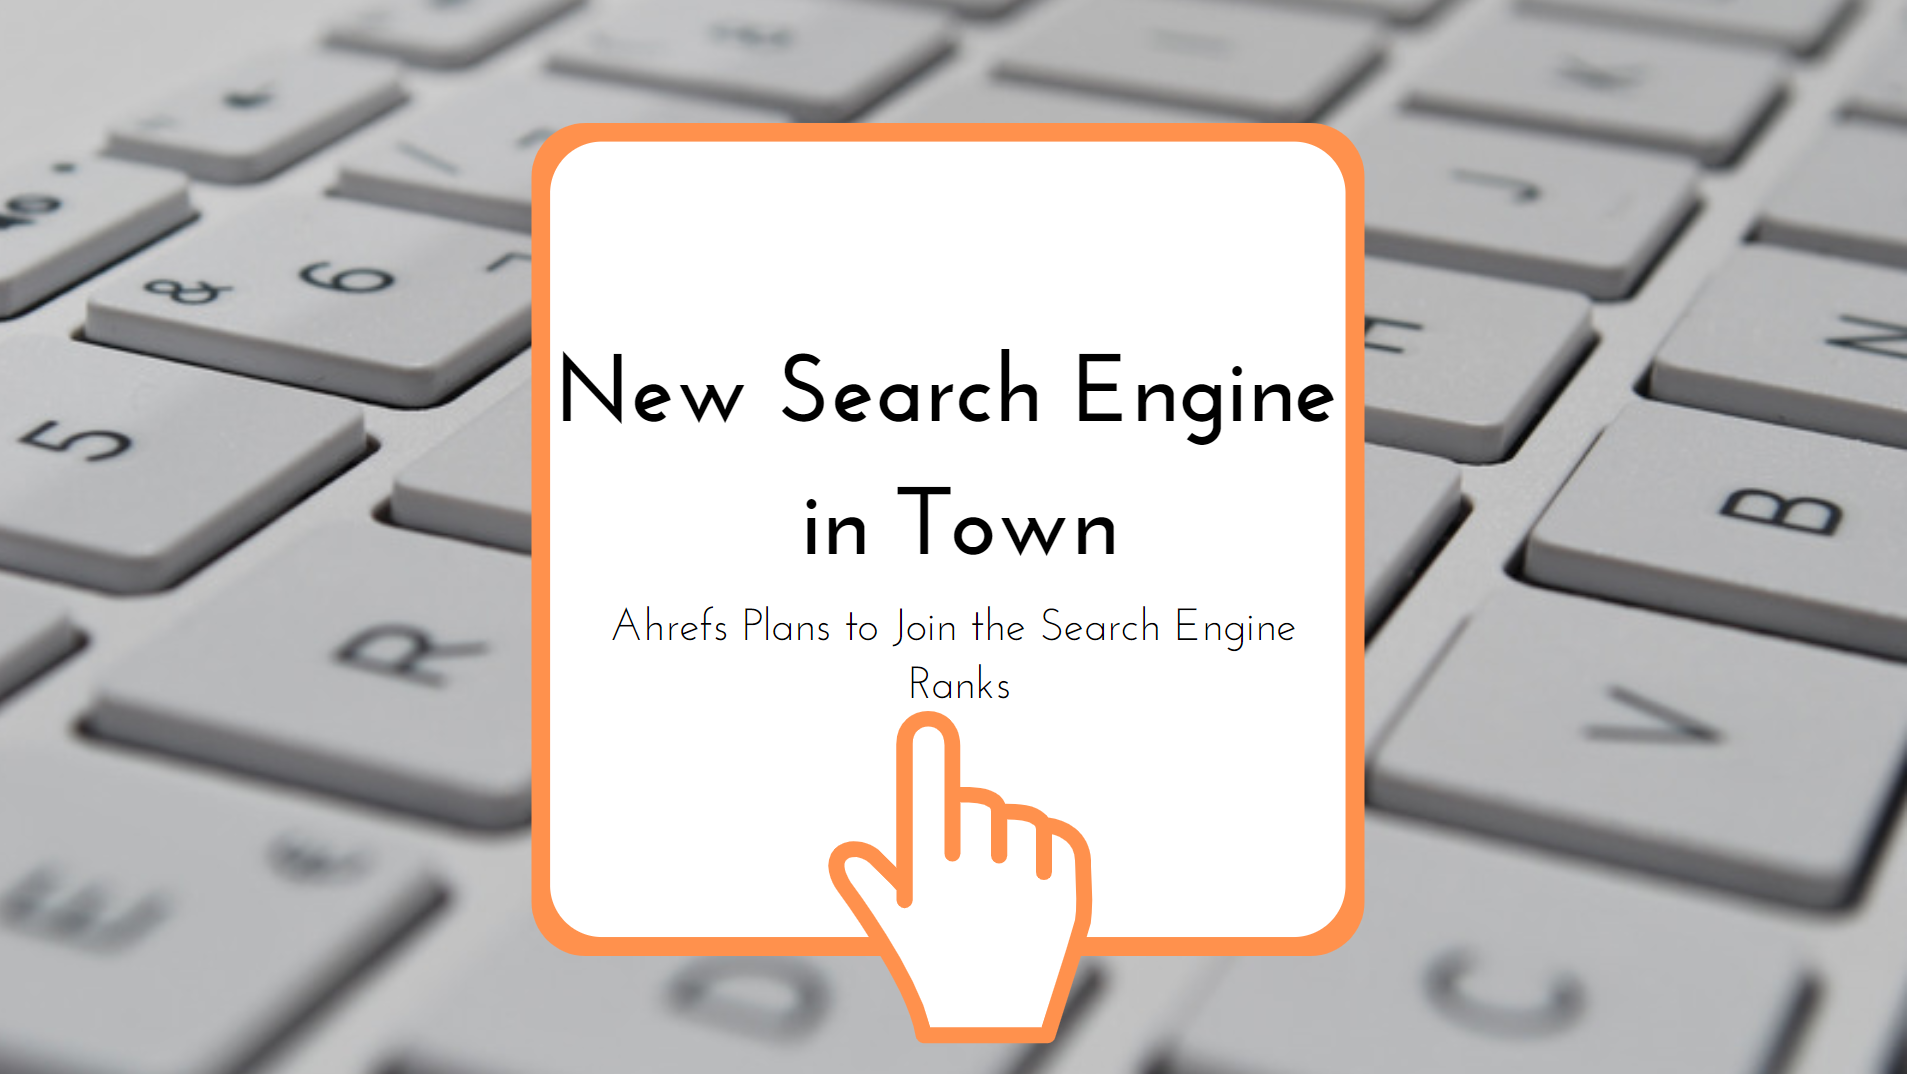 ahrefs new search engine announcement poster